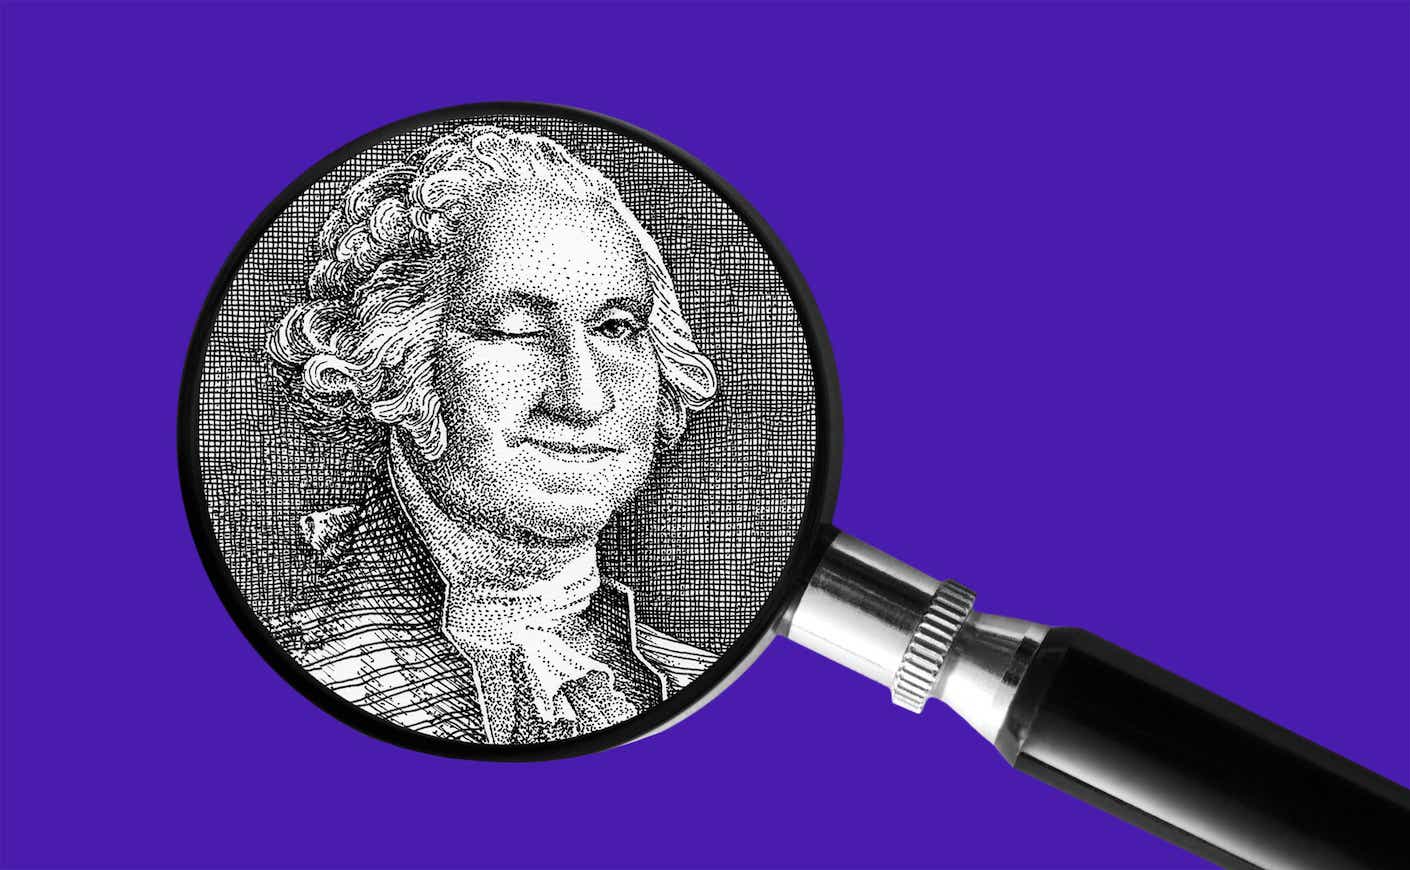 A sketch of George Washington smiling and winking, inside a magnifying glass